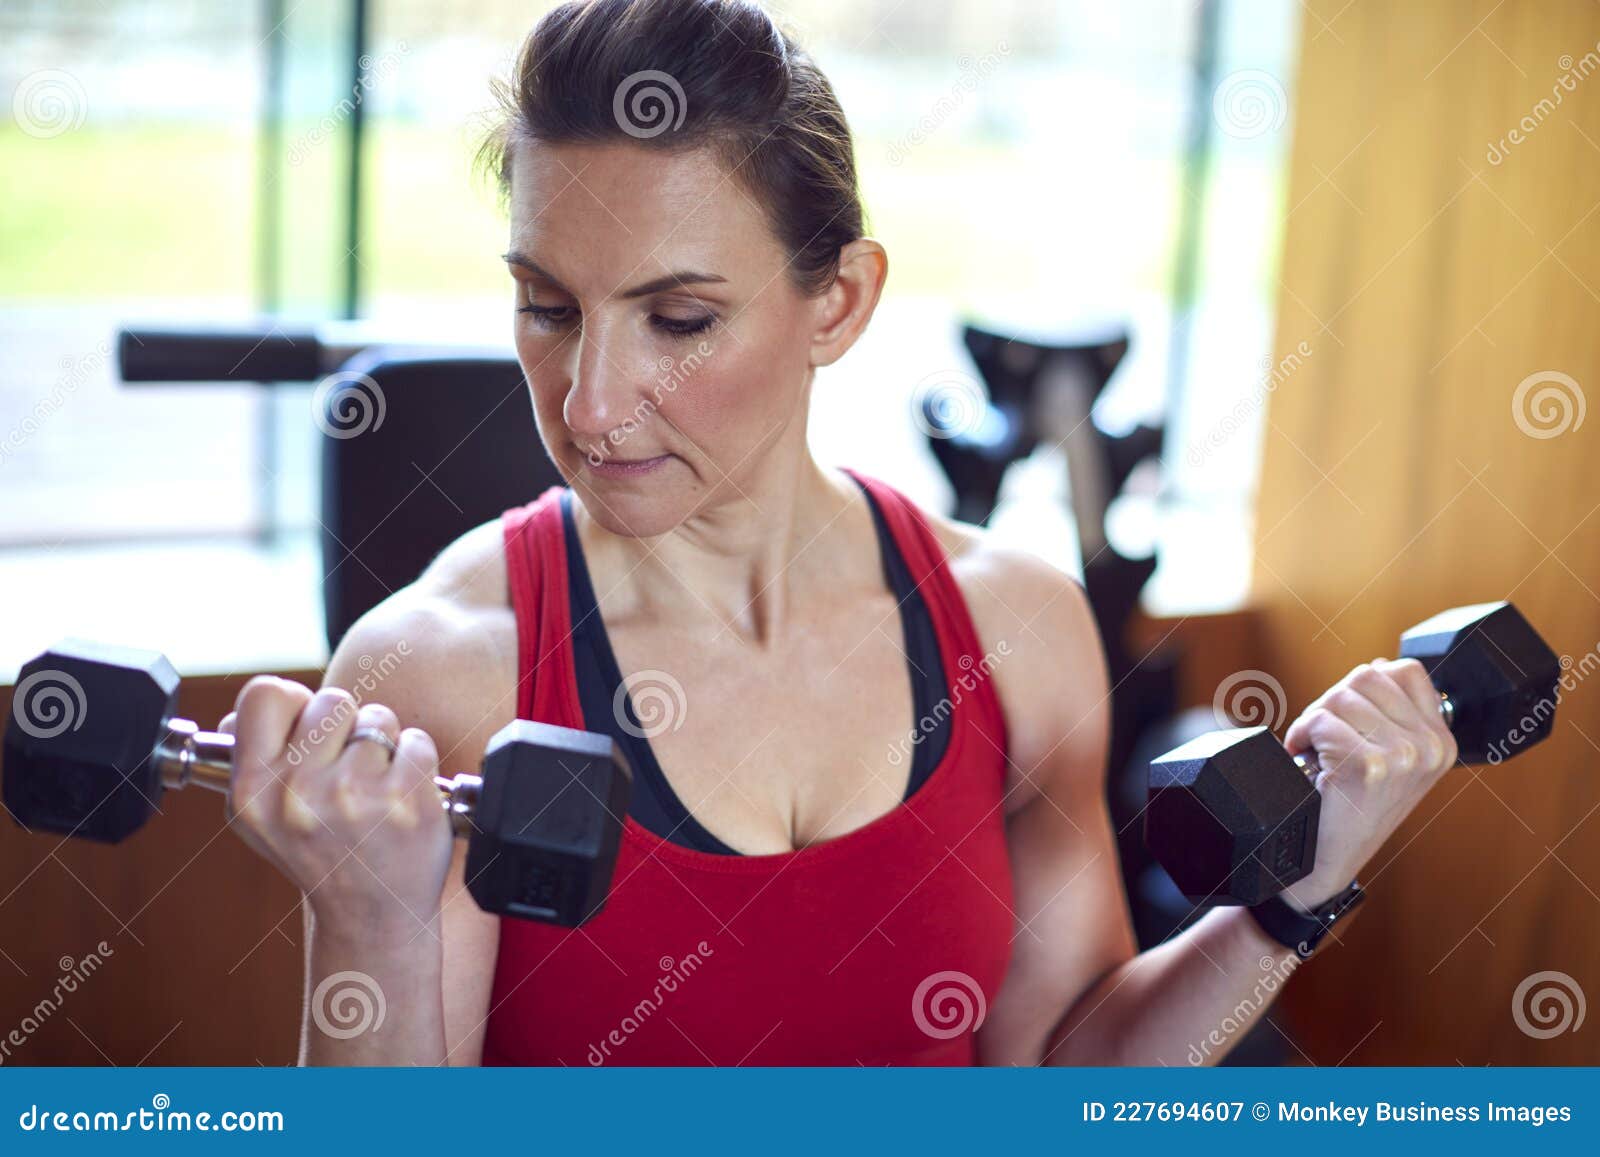 Mature Woman Exercising In Home Gym Lifting Hand Weights Stock Image